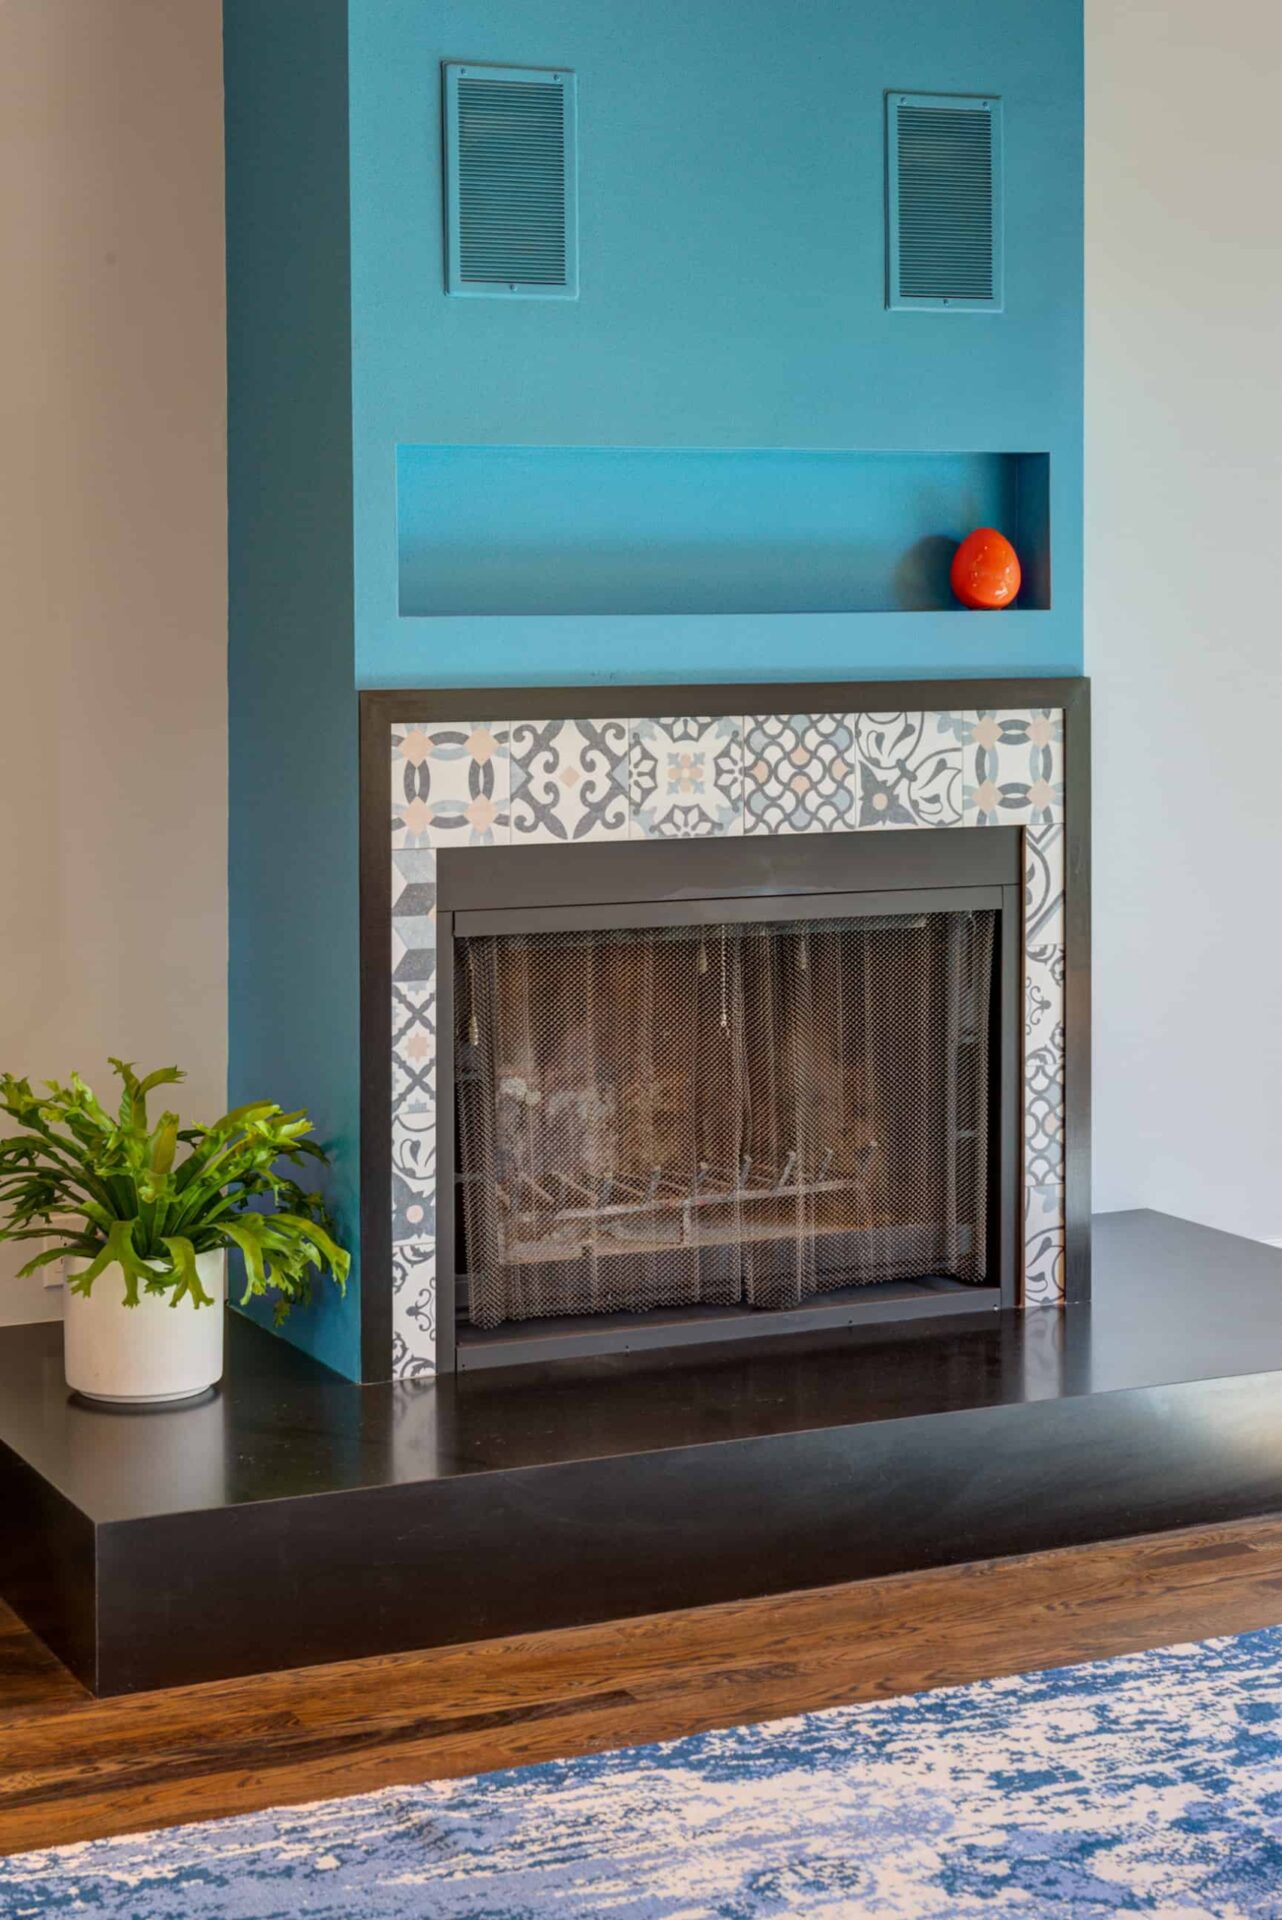 Unique fireplace with striking blue paint and tiles.